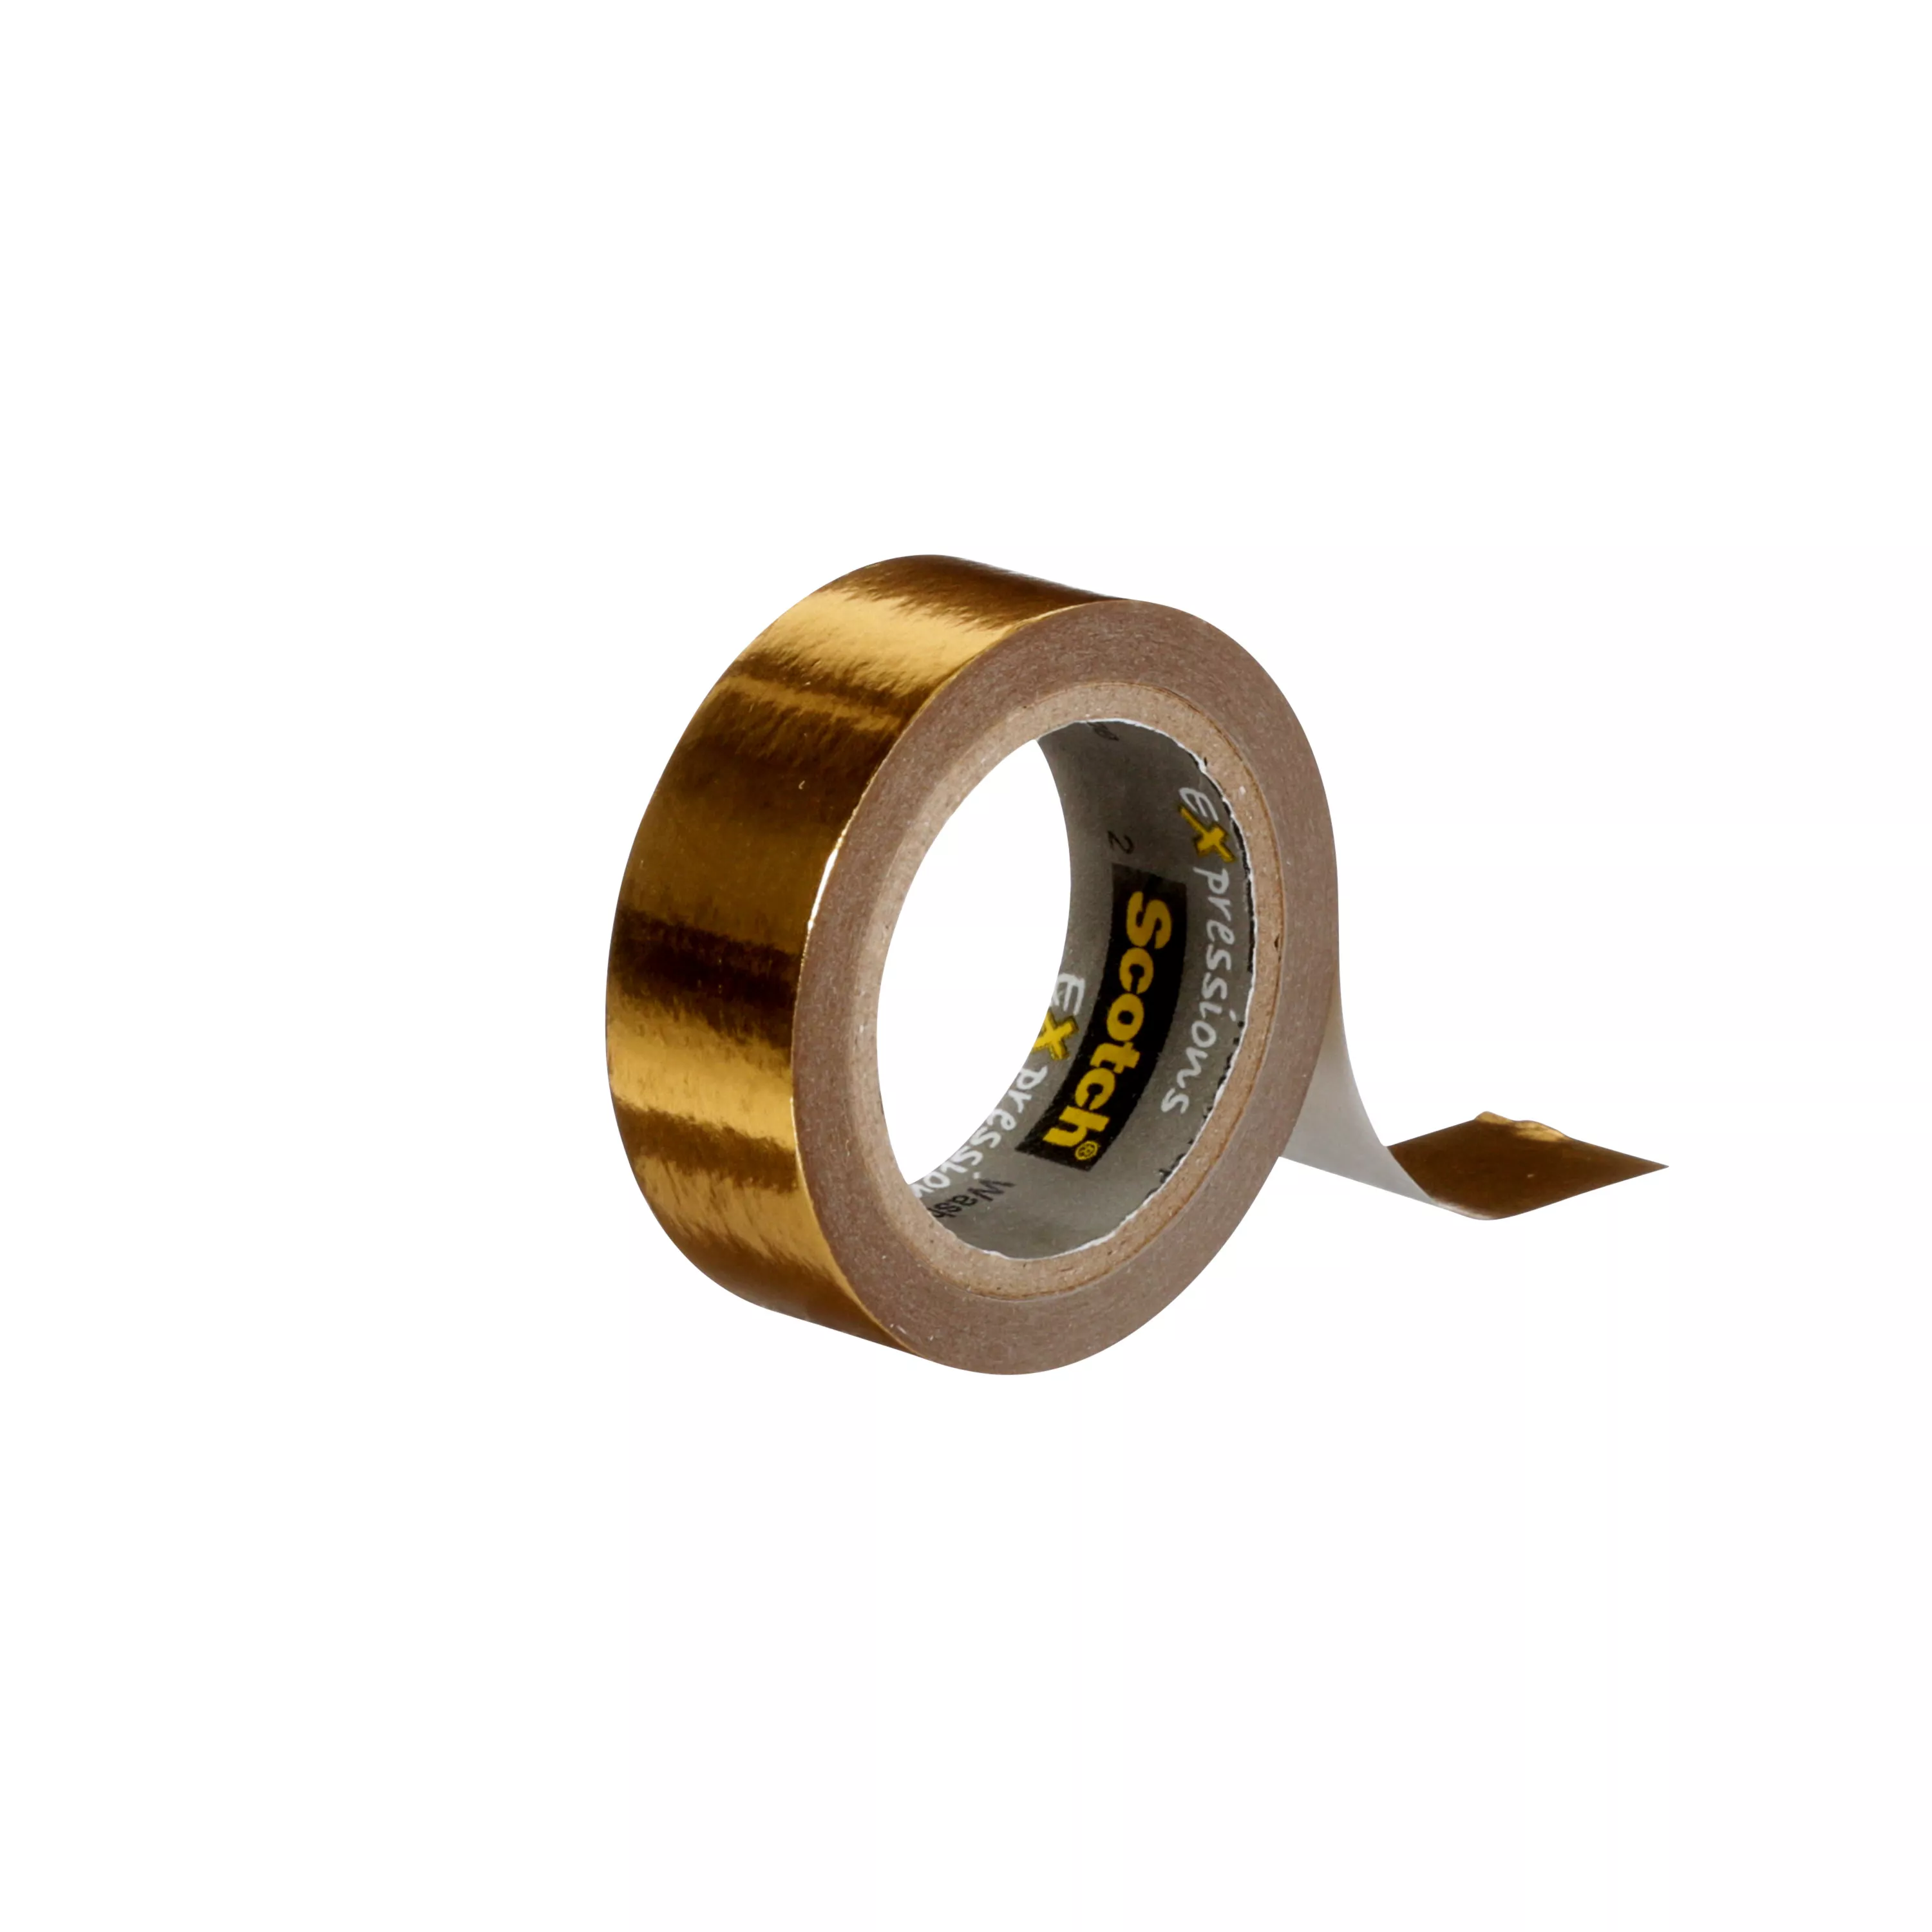 Product Number C614-GLD | Scotch® Expressions Washi Tape C614-GLD